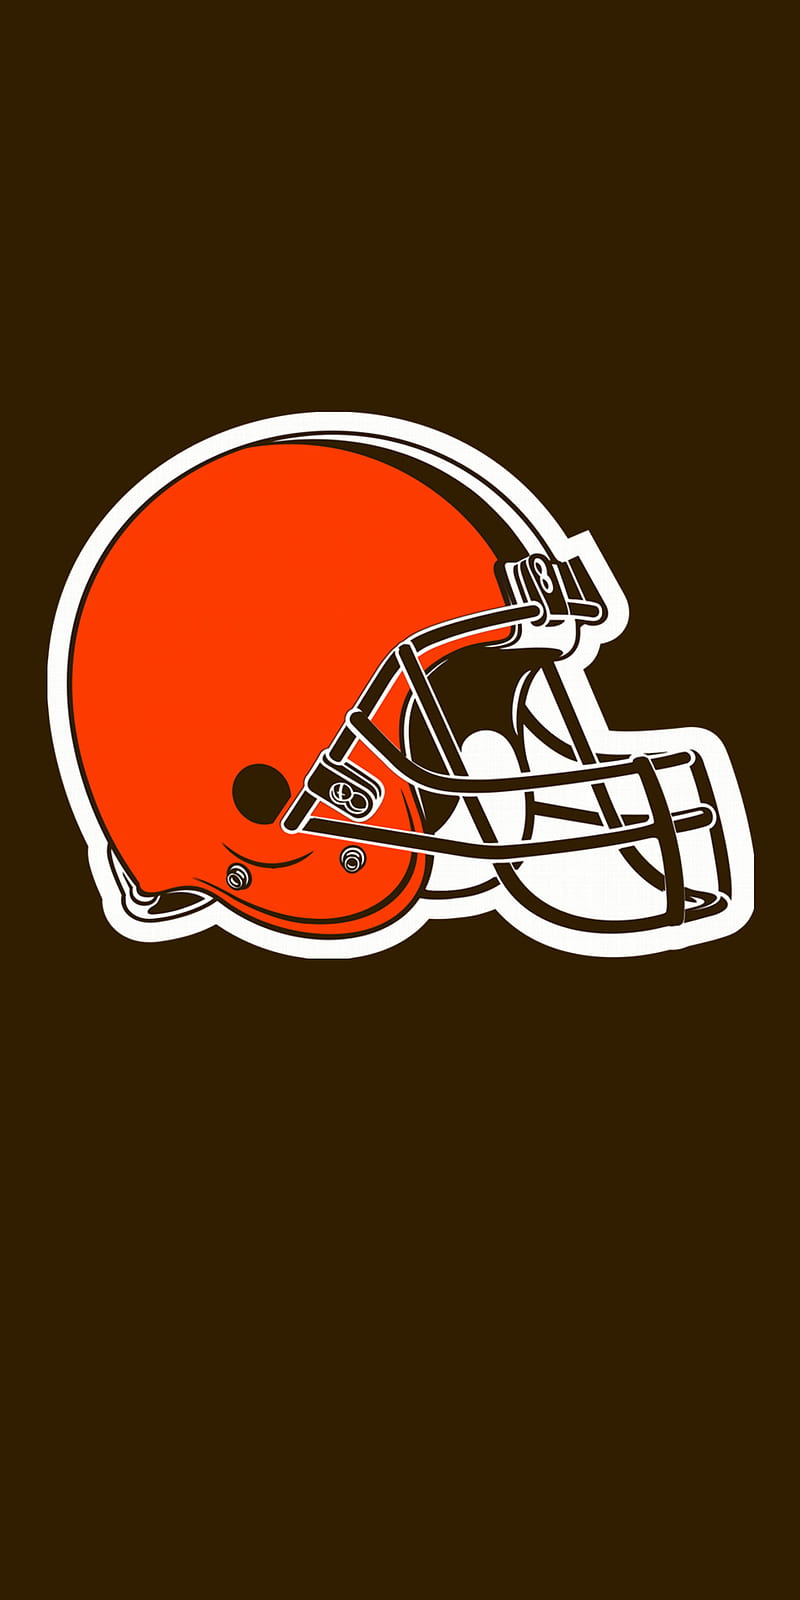 Download wallpapers Cleveland Browns NFL 4k wooden texture american  football logo emblem Cleveland Ohio USA National Football League  American Conference for desktop with resolution 3840x2400 High Quality HD  pictures wallpapers